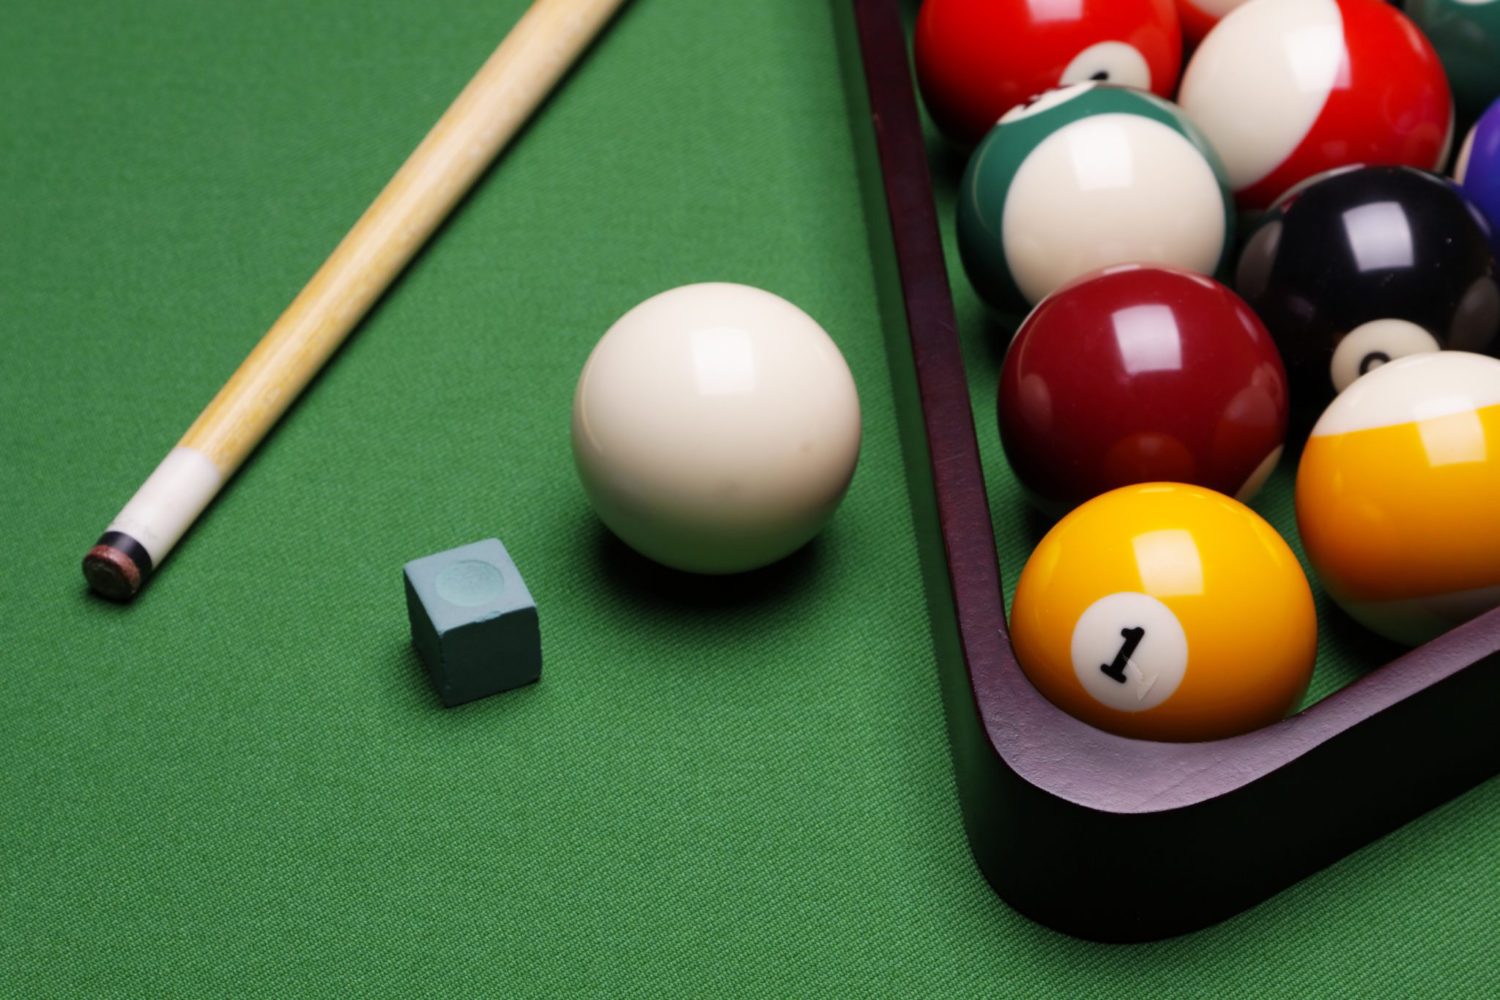 Pool aka billiards can be intimidating. Learn how to play pool for beginners at www.GameOnFamily.com and up your game! Learn billiards basics and pool rules via our pool game tutorial. Game on! #gameroomgames